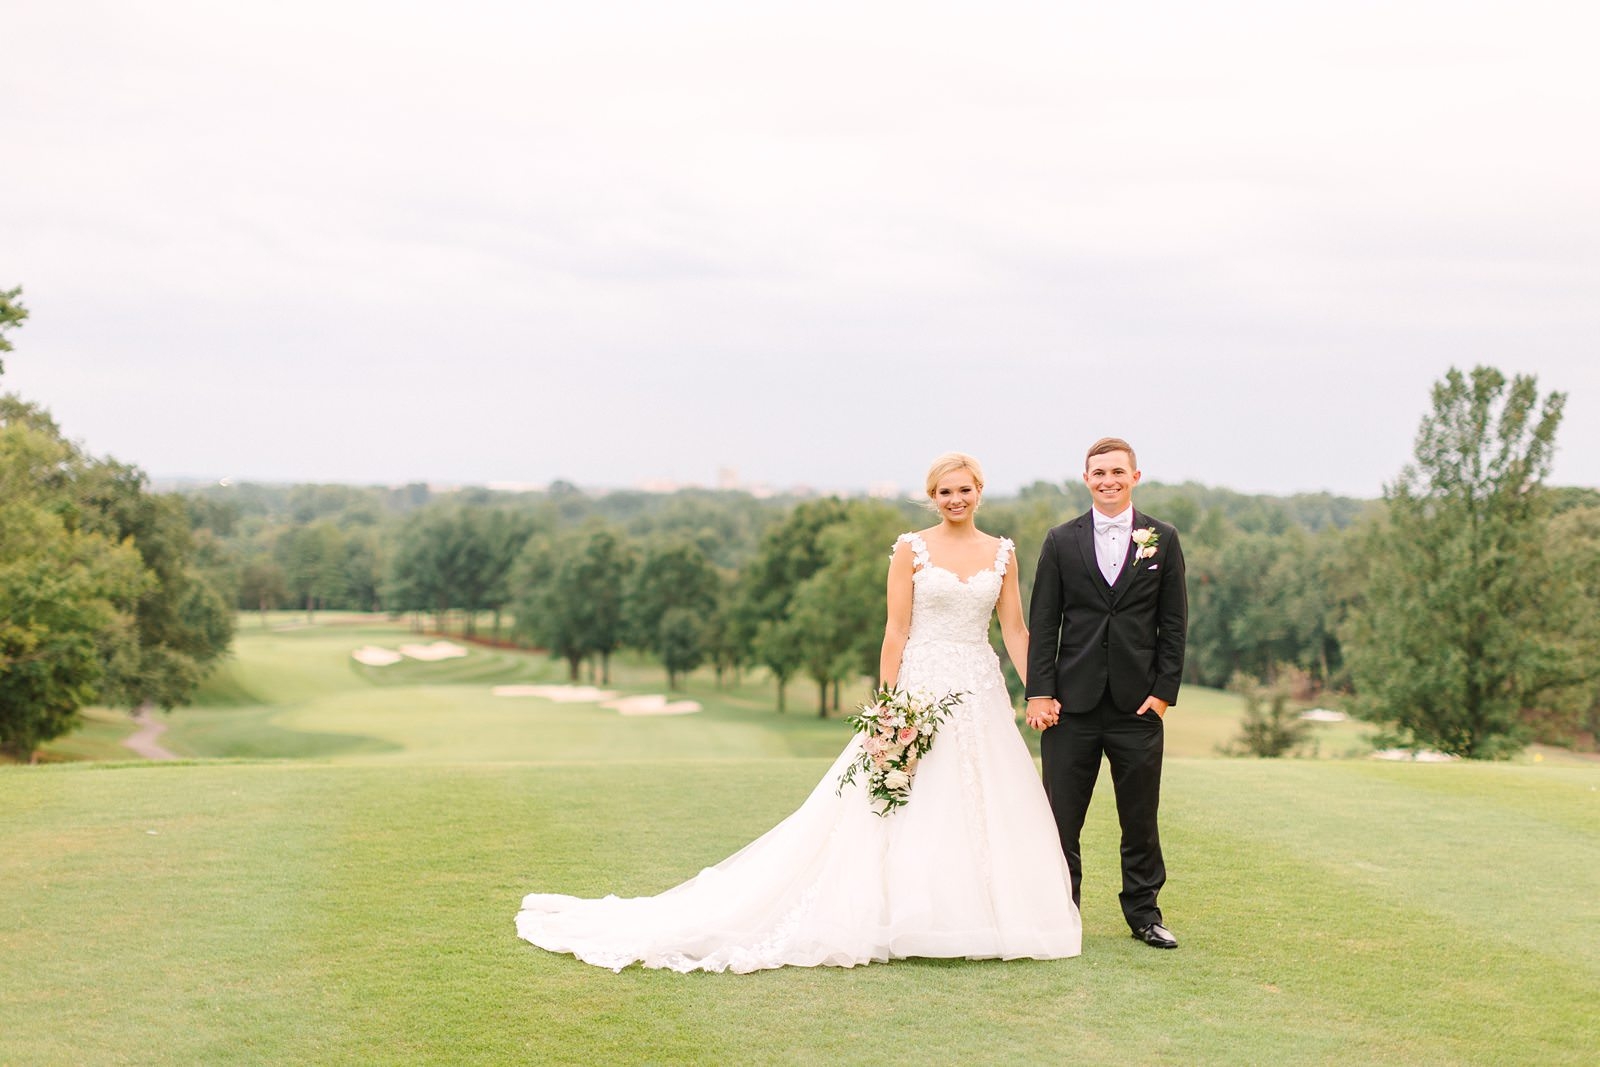  An Evansville Country Club Wedding Kelsi and Andrew181.jpg